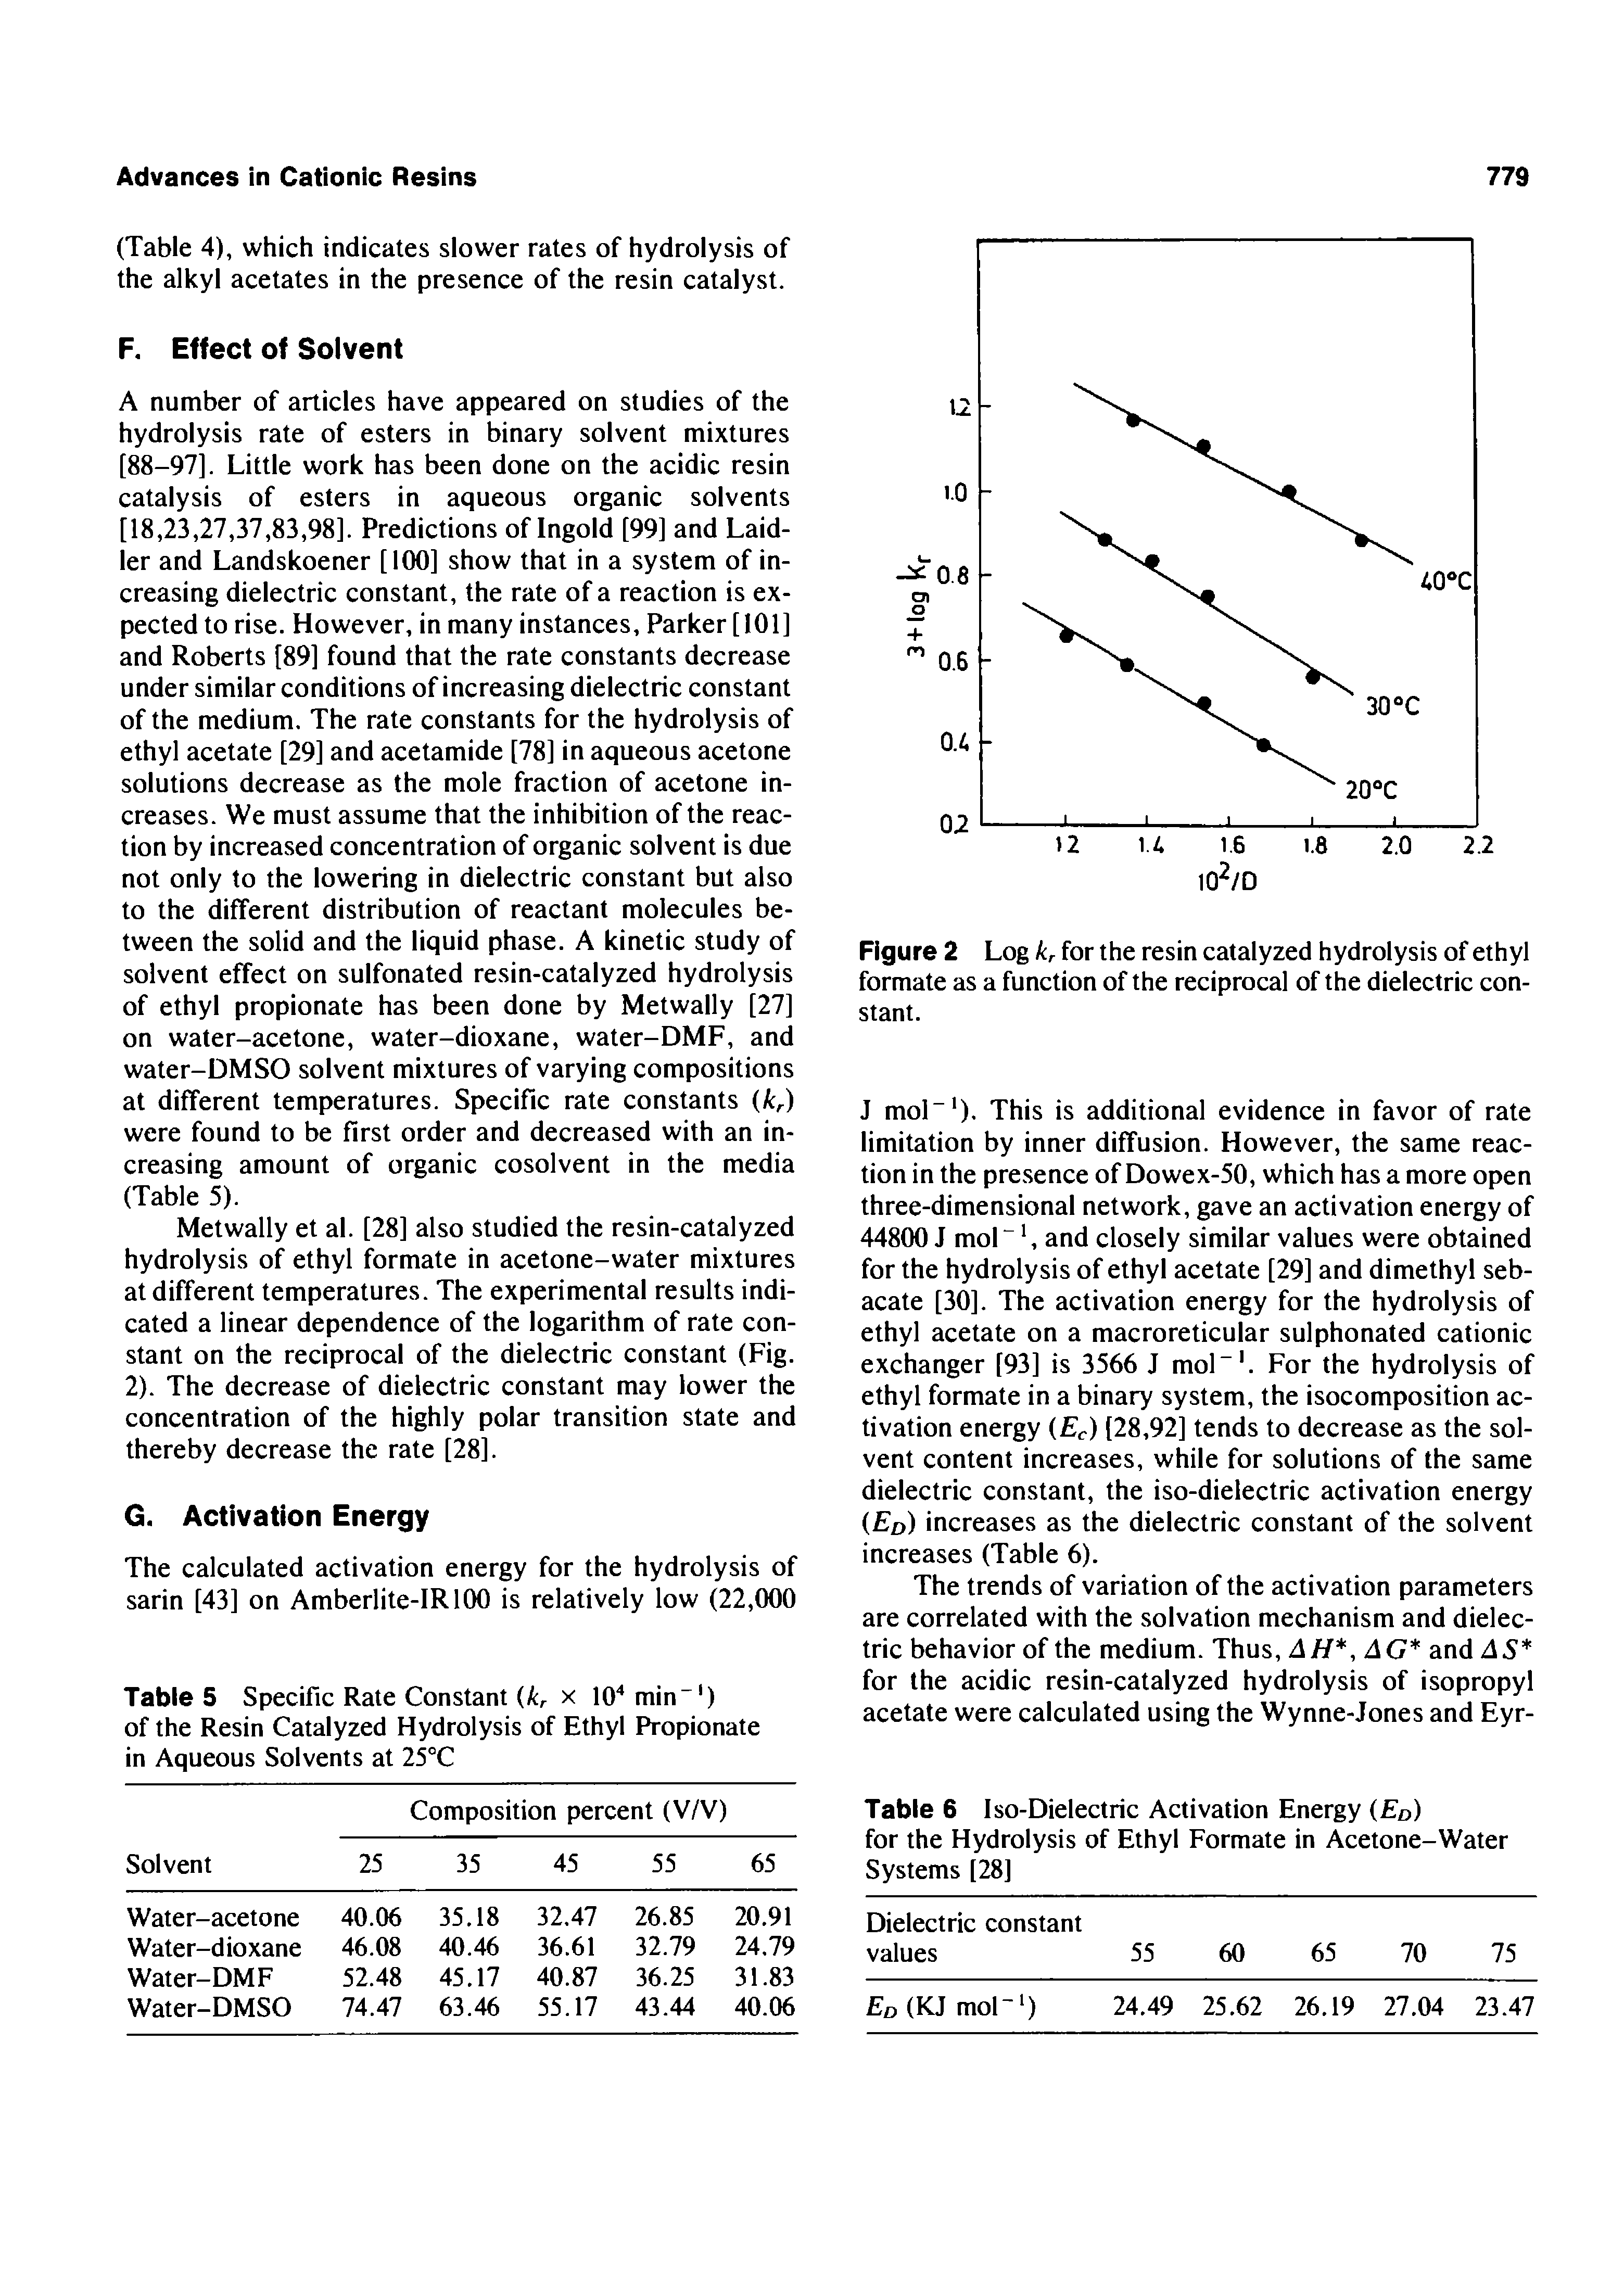 Figure 2 Log kr for the resin catalyzed hydrolysis of ethyl formate as a function of the reciprocal of the dielectric constant.